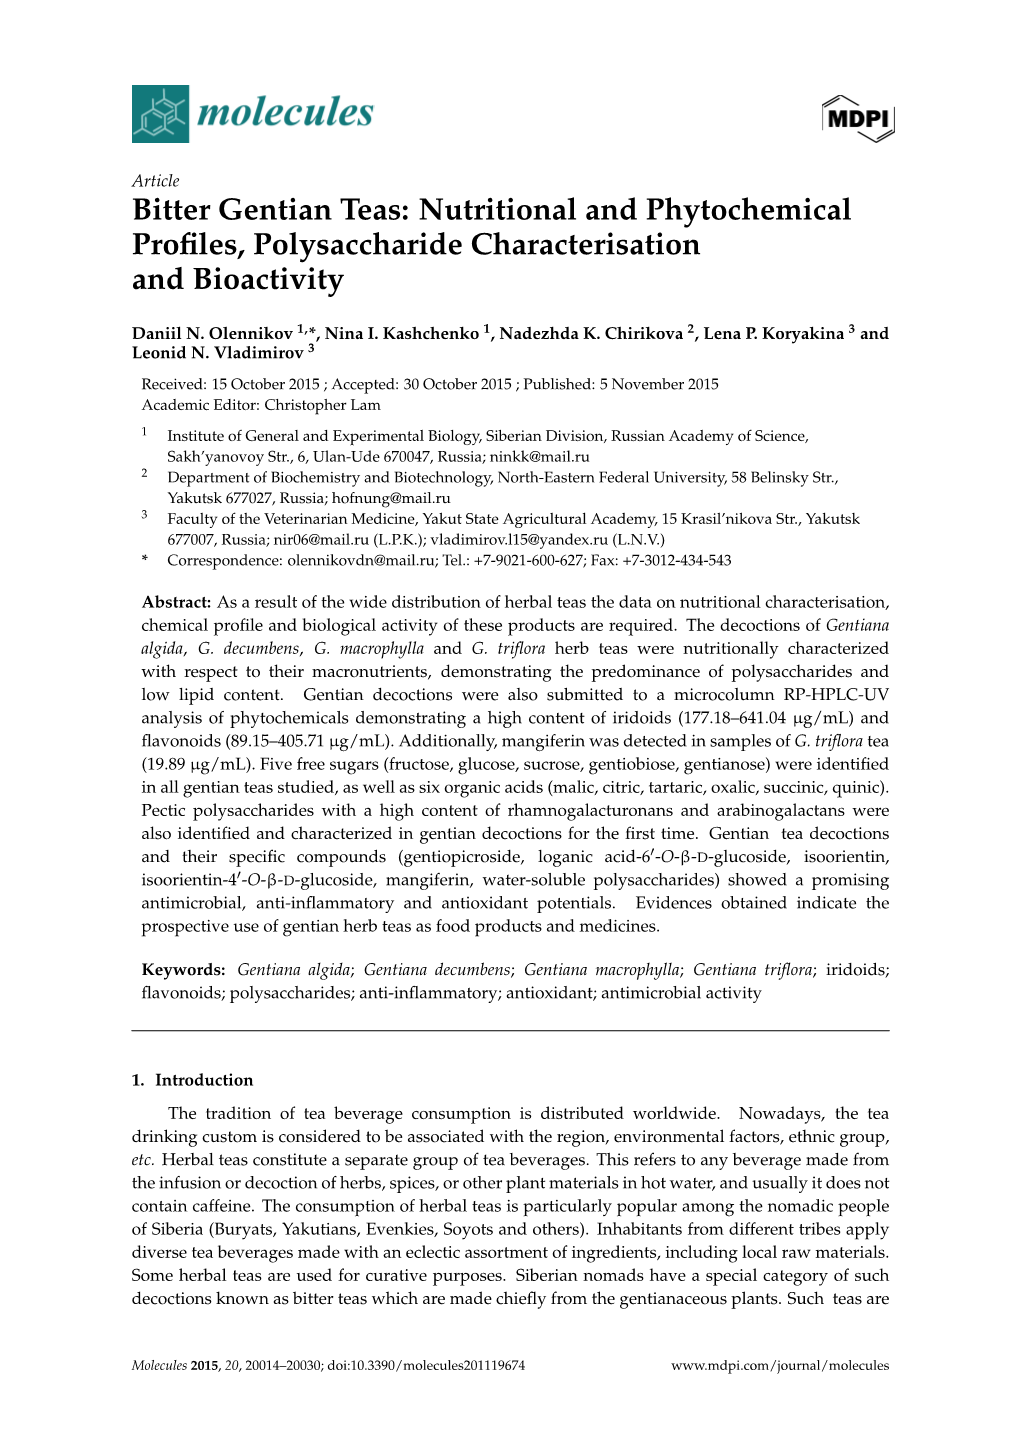 Bitter Gentian Teas: Nutritional and Phytochemical Proﬁles, Polysaccharide Characterisation and Bioactivity